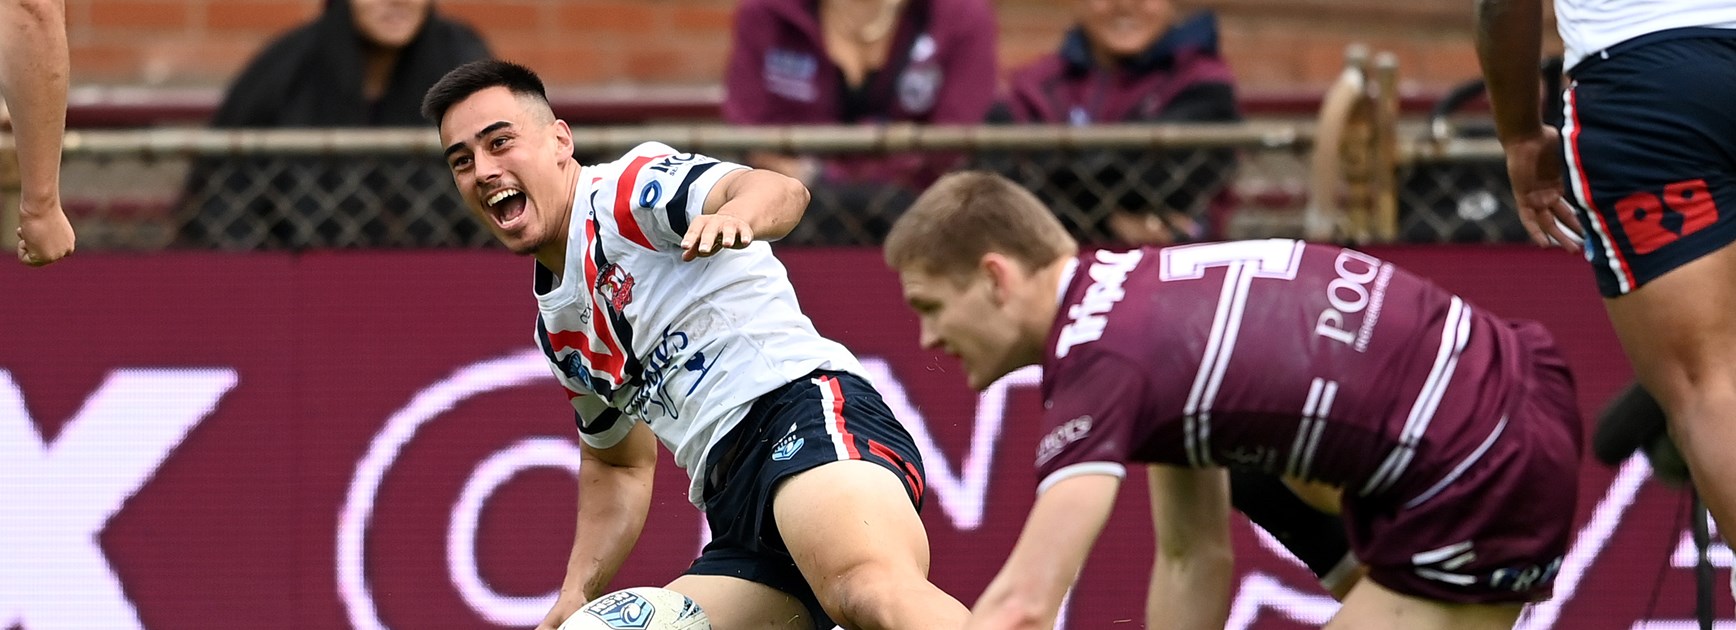 Gritty Roosters Victorious in Low-Scoring Contest